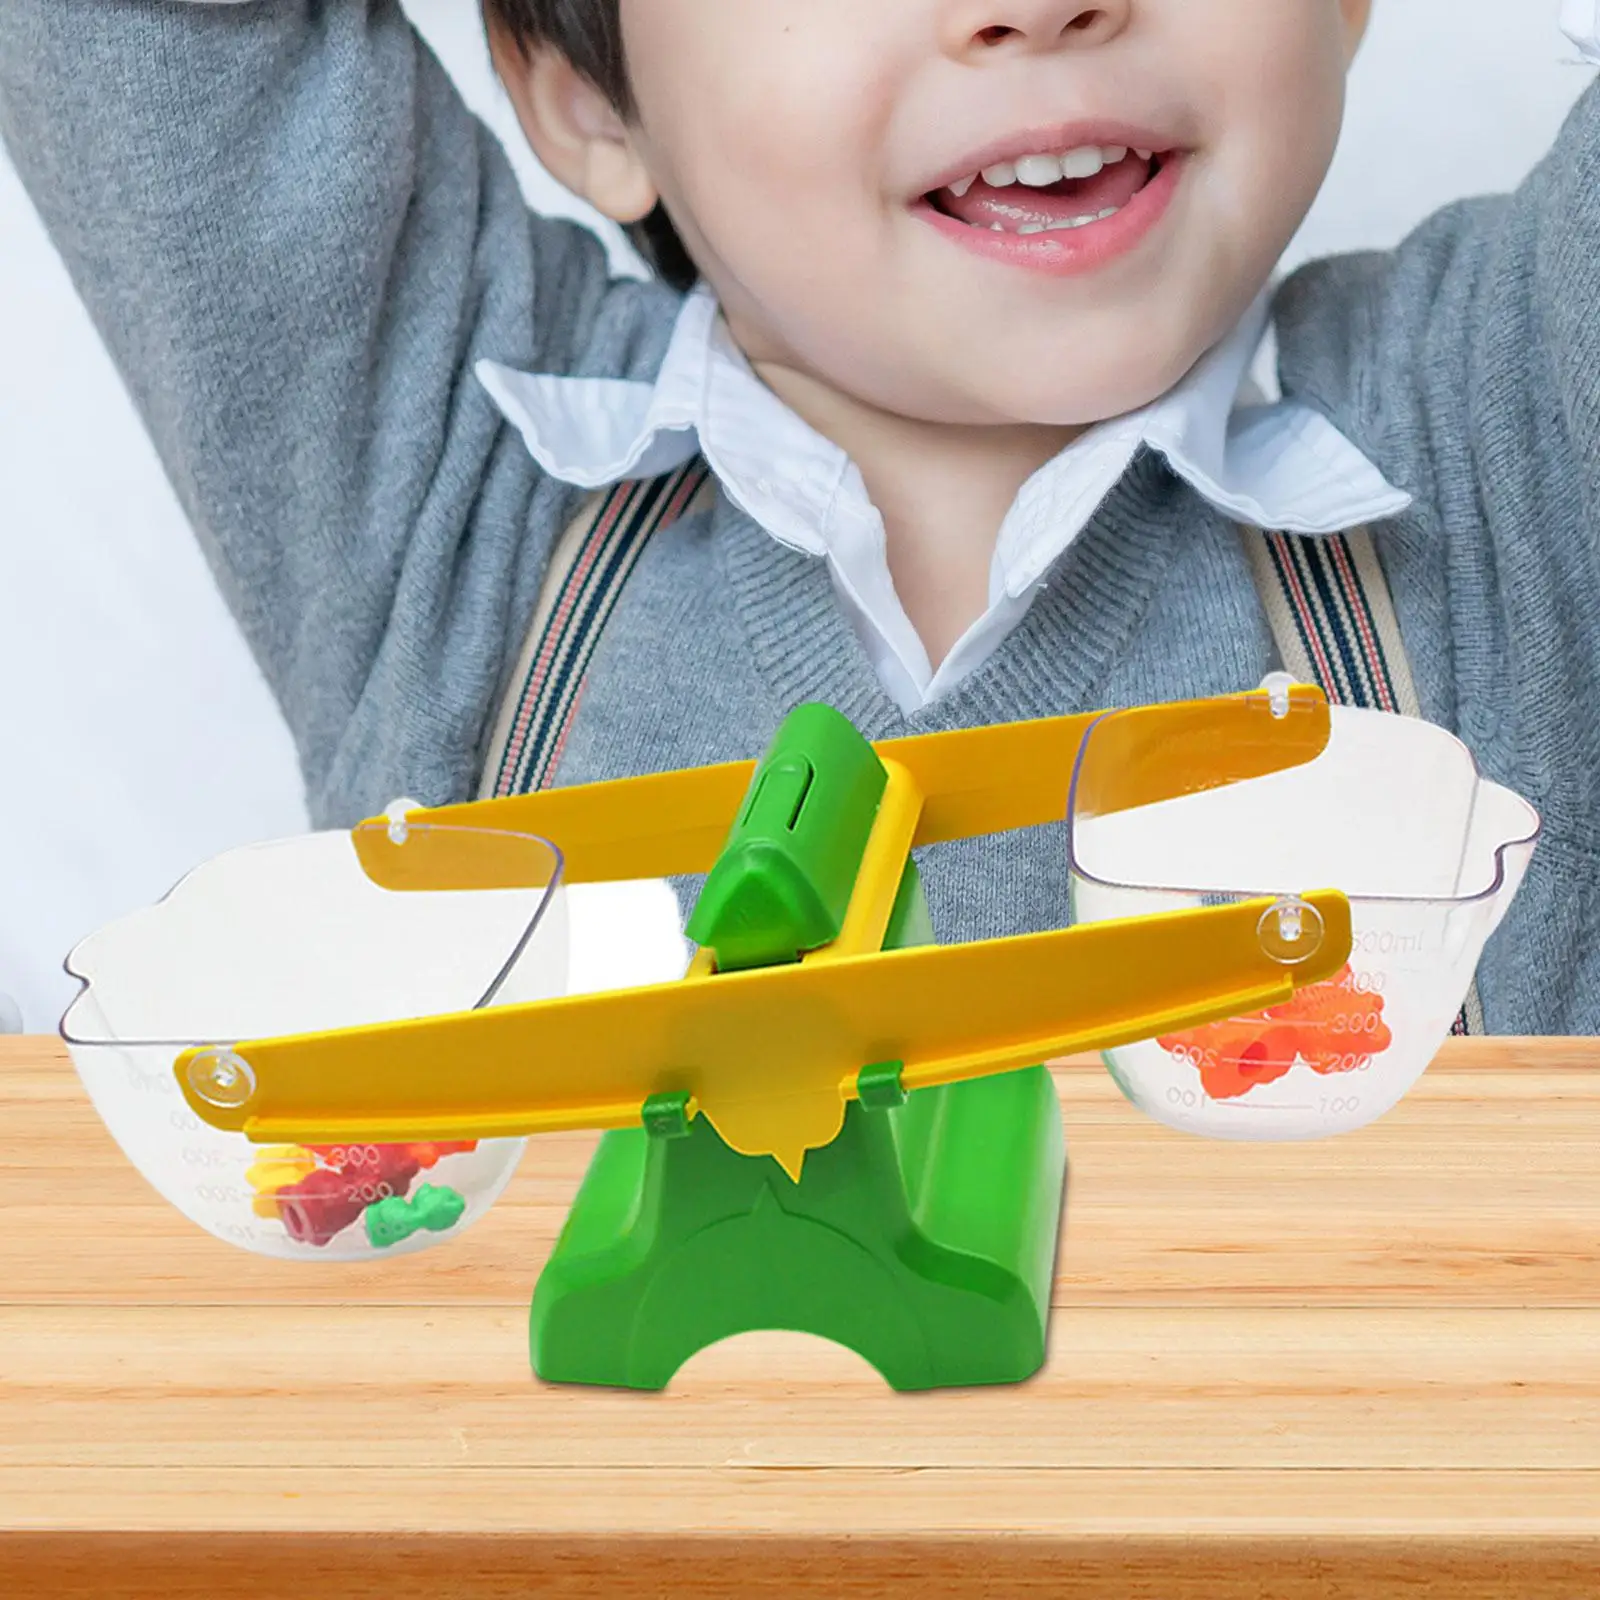 Kids Scale Solids and Liquids Space Saving Double Pan Balance Scale Bucket Balance for Length Capacity Height Adding Subtracting